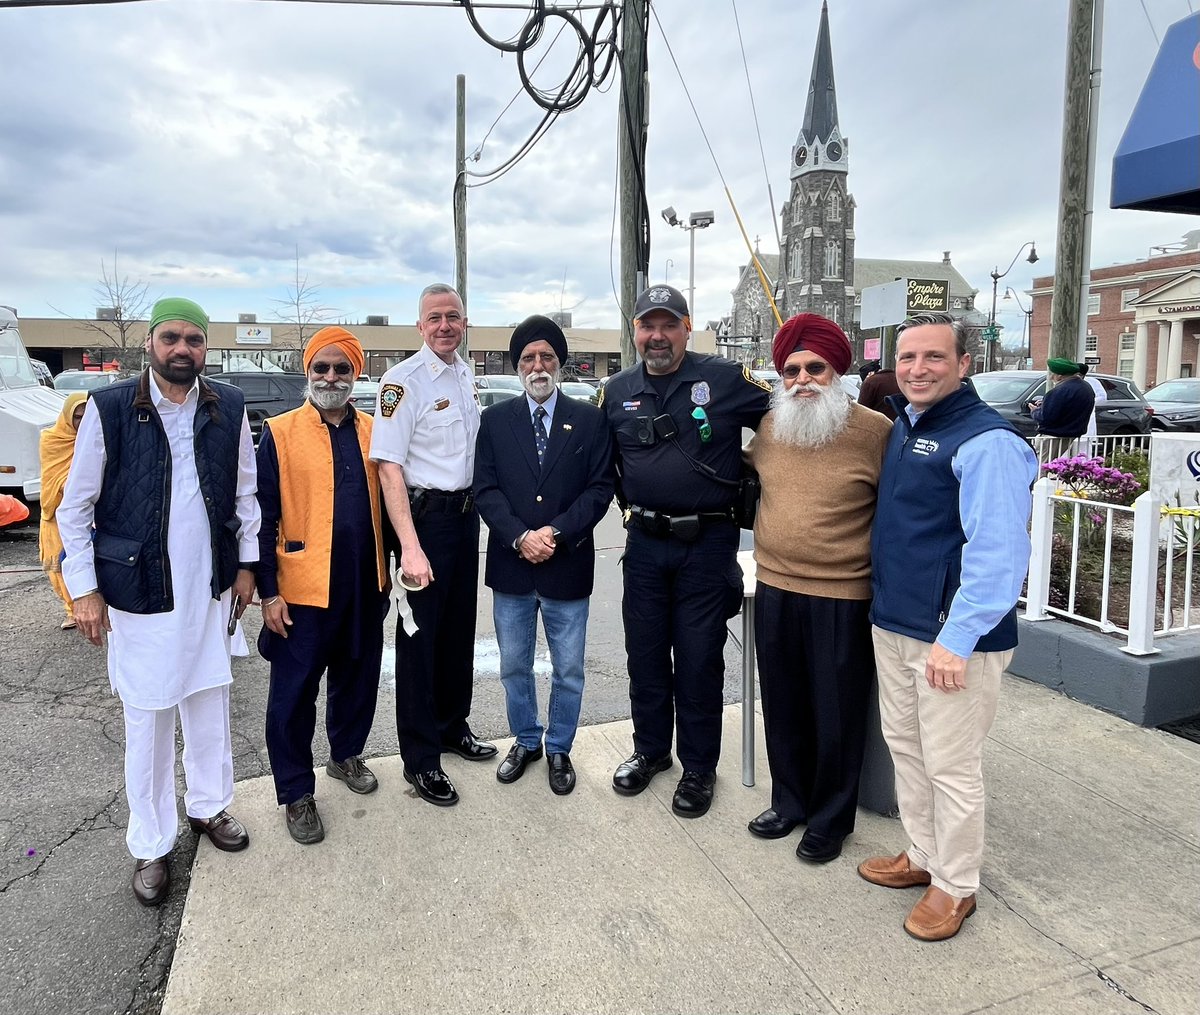 Happy #Vaisakhi to my friends in the Sikh community. I always appreciate the invitation to celebrate with you and eat delicious food. Wishing you a year of love and peace. #Vaisakhi2024